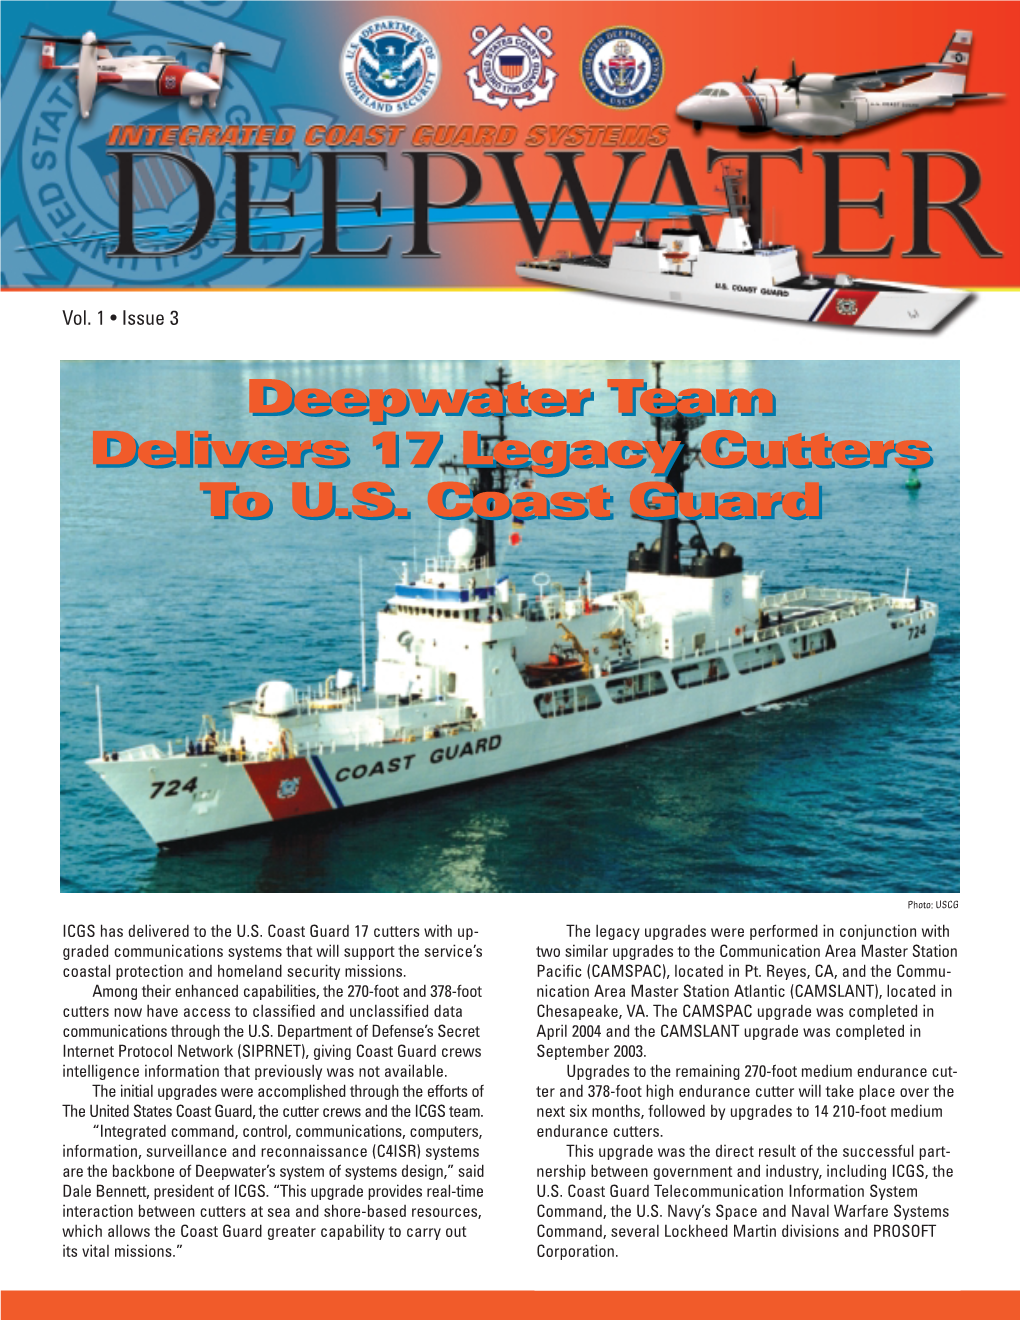 Deepwater Team Delivers 17 Legacy Cutters to U.S. Coast Guard Deepwater Team Delivers 17 Legacy Cutters to U.S. Coast Guard